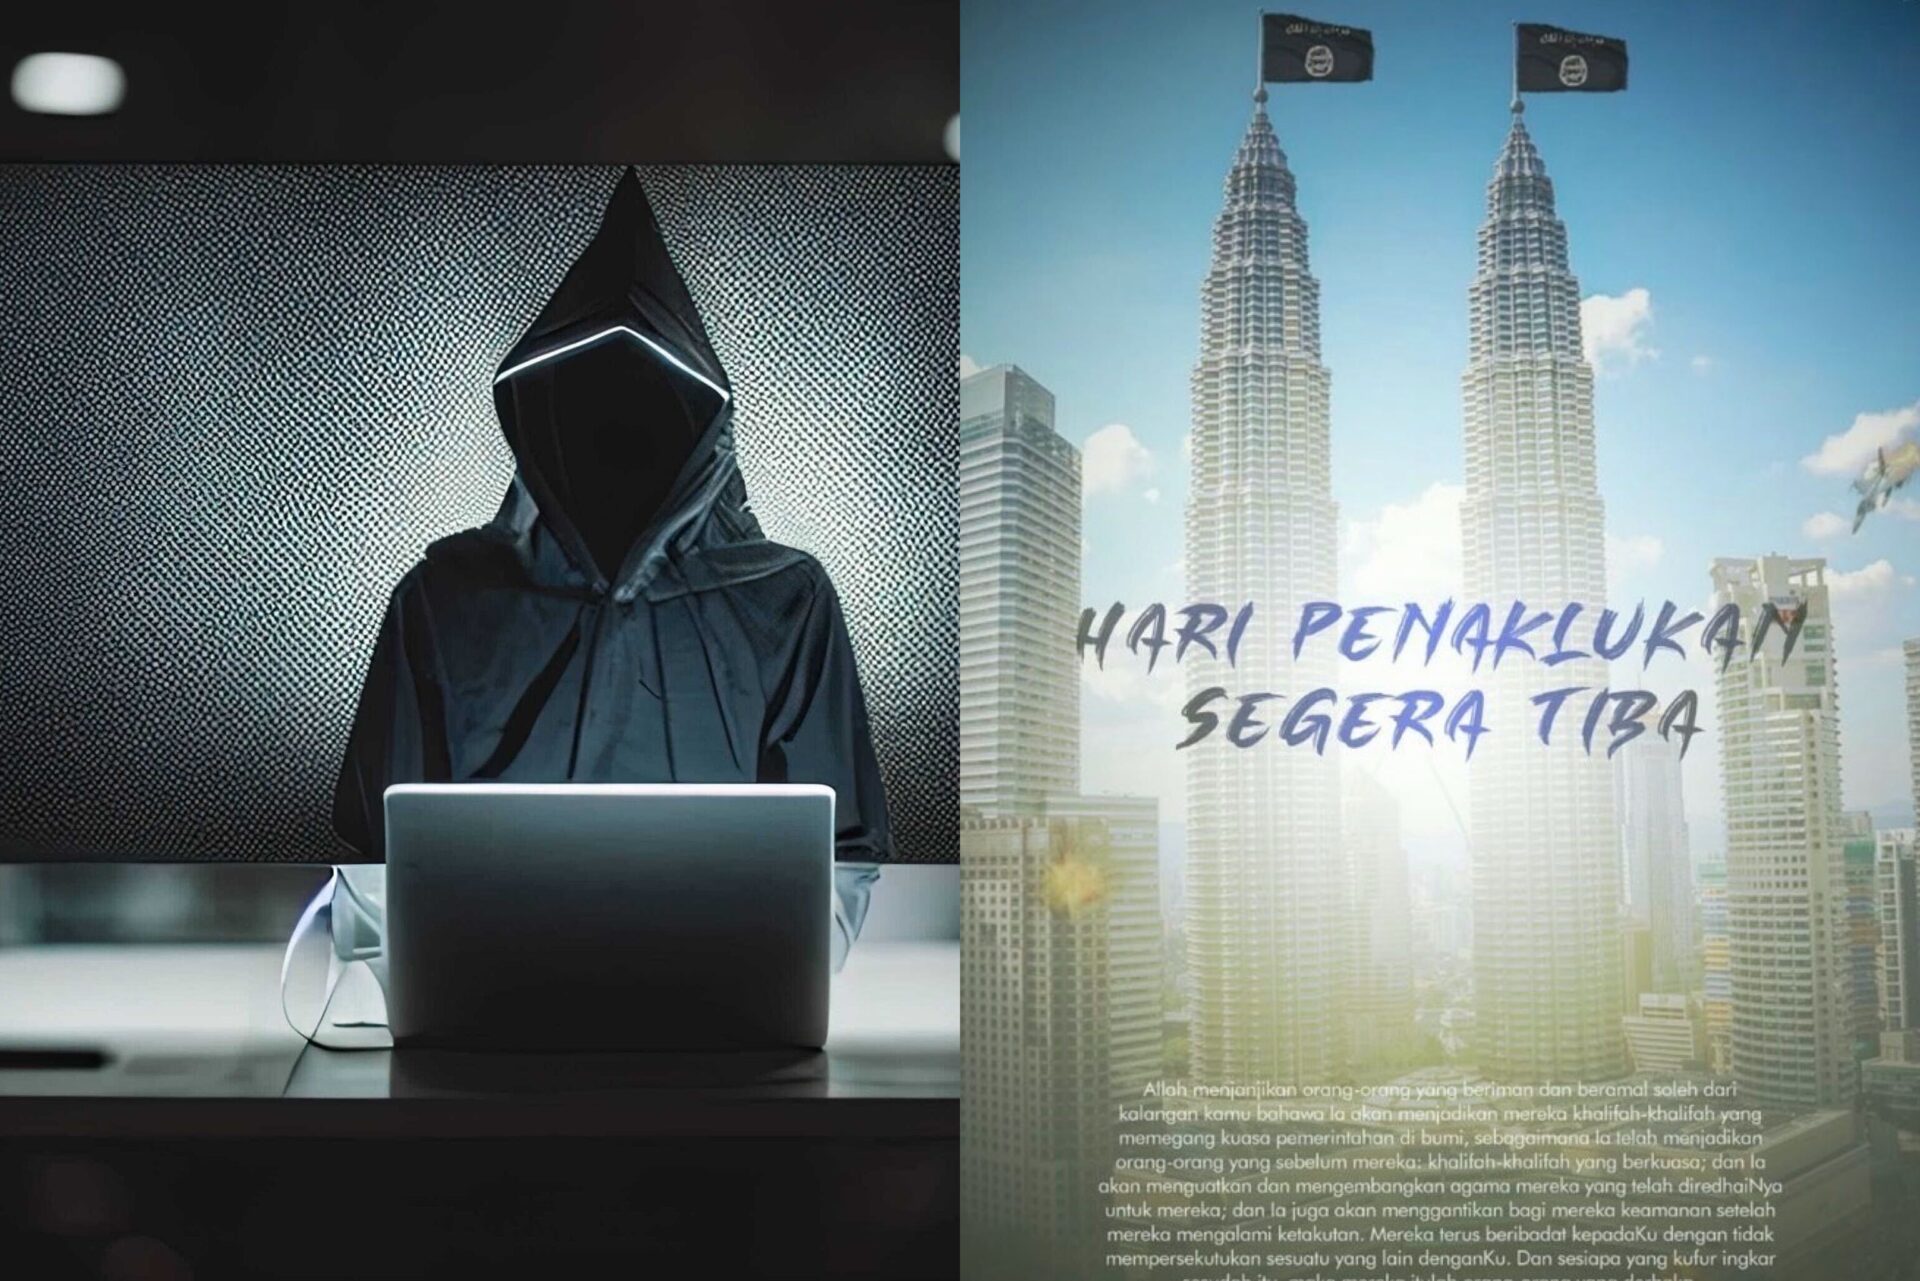 Malaysia police tell public not to panic after reports of Islamic State propaganda in the country